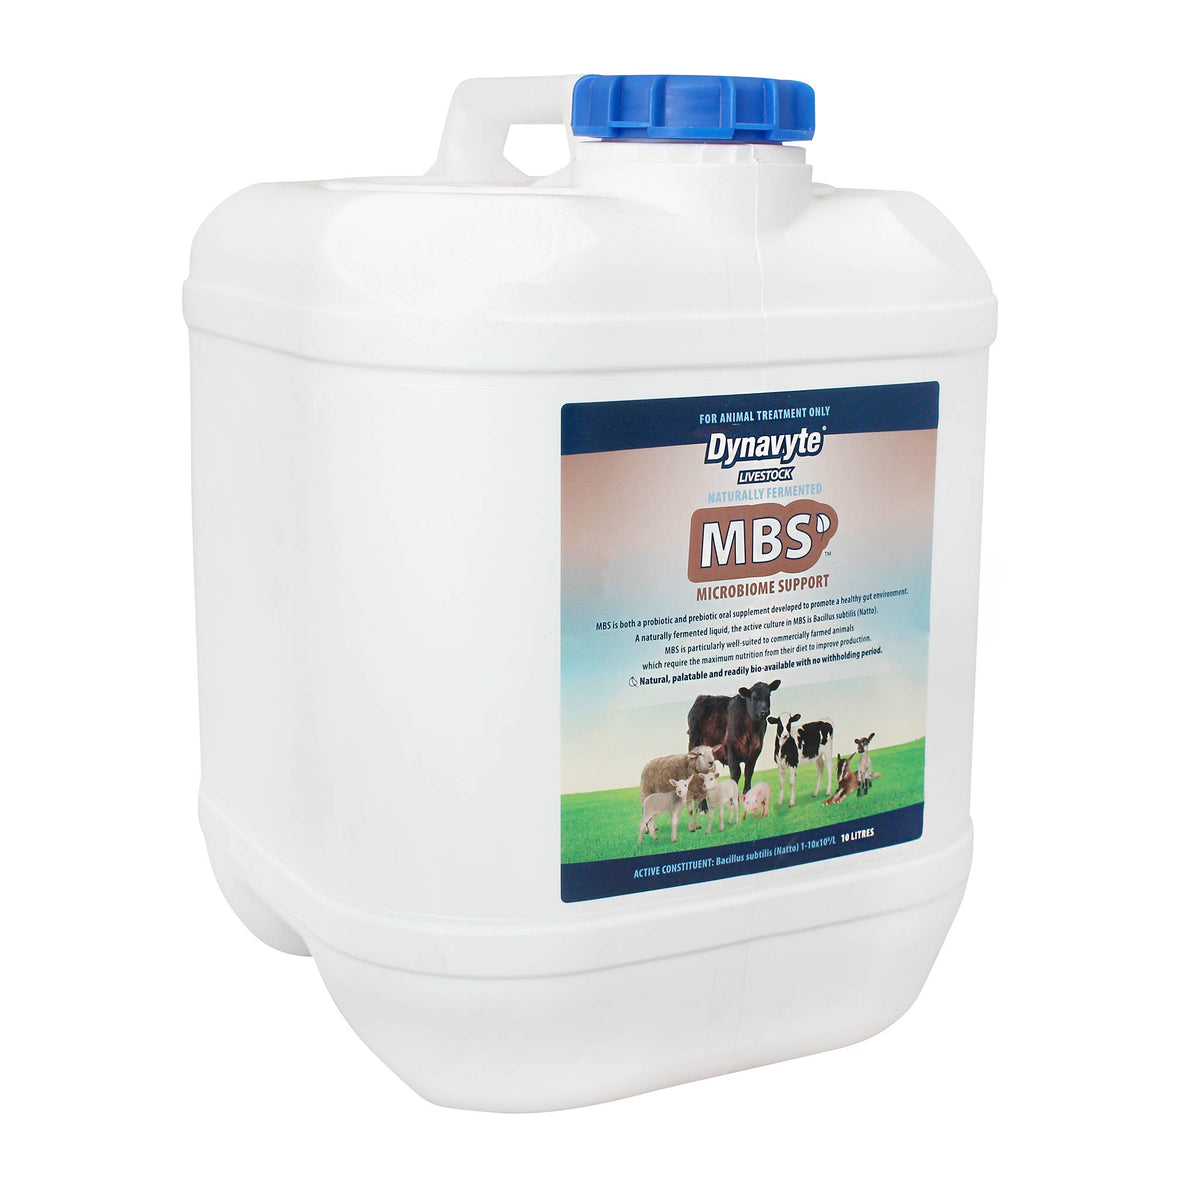 Dynavyte MBS Microbiome Support for Livestock